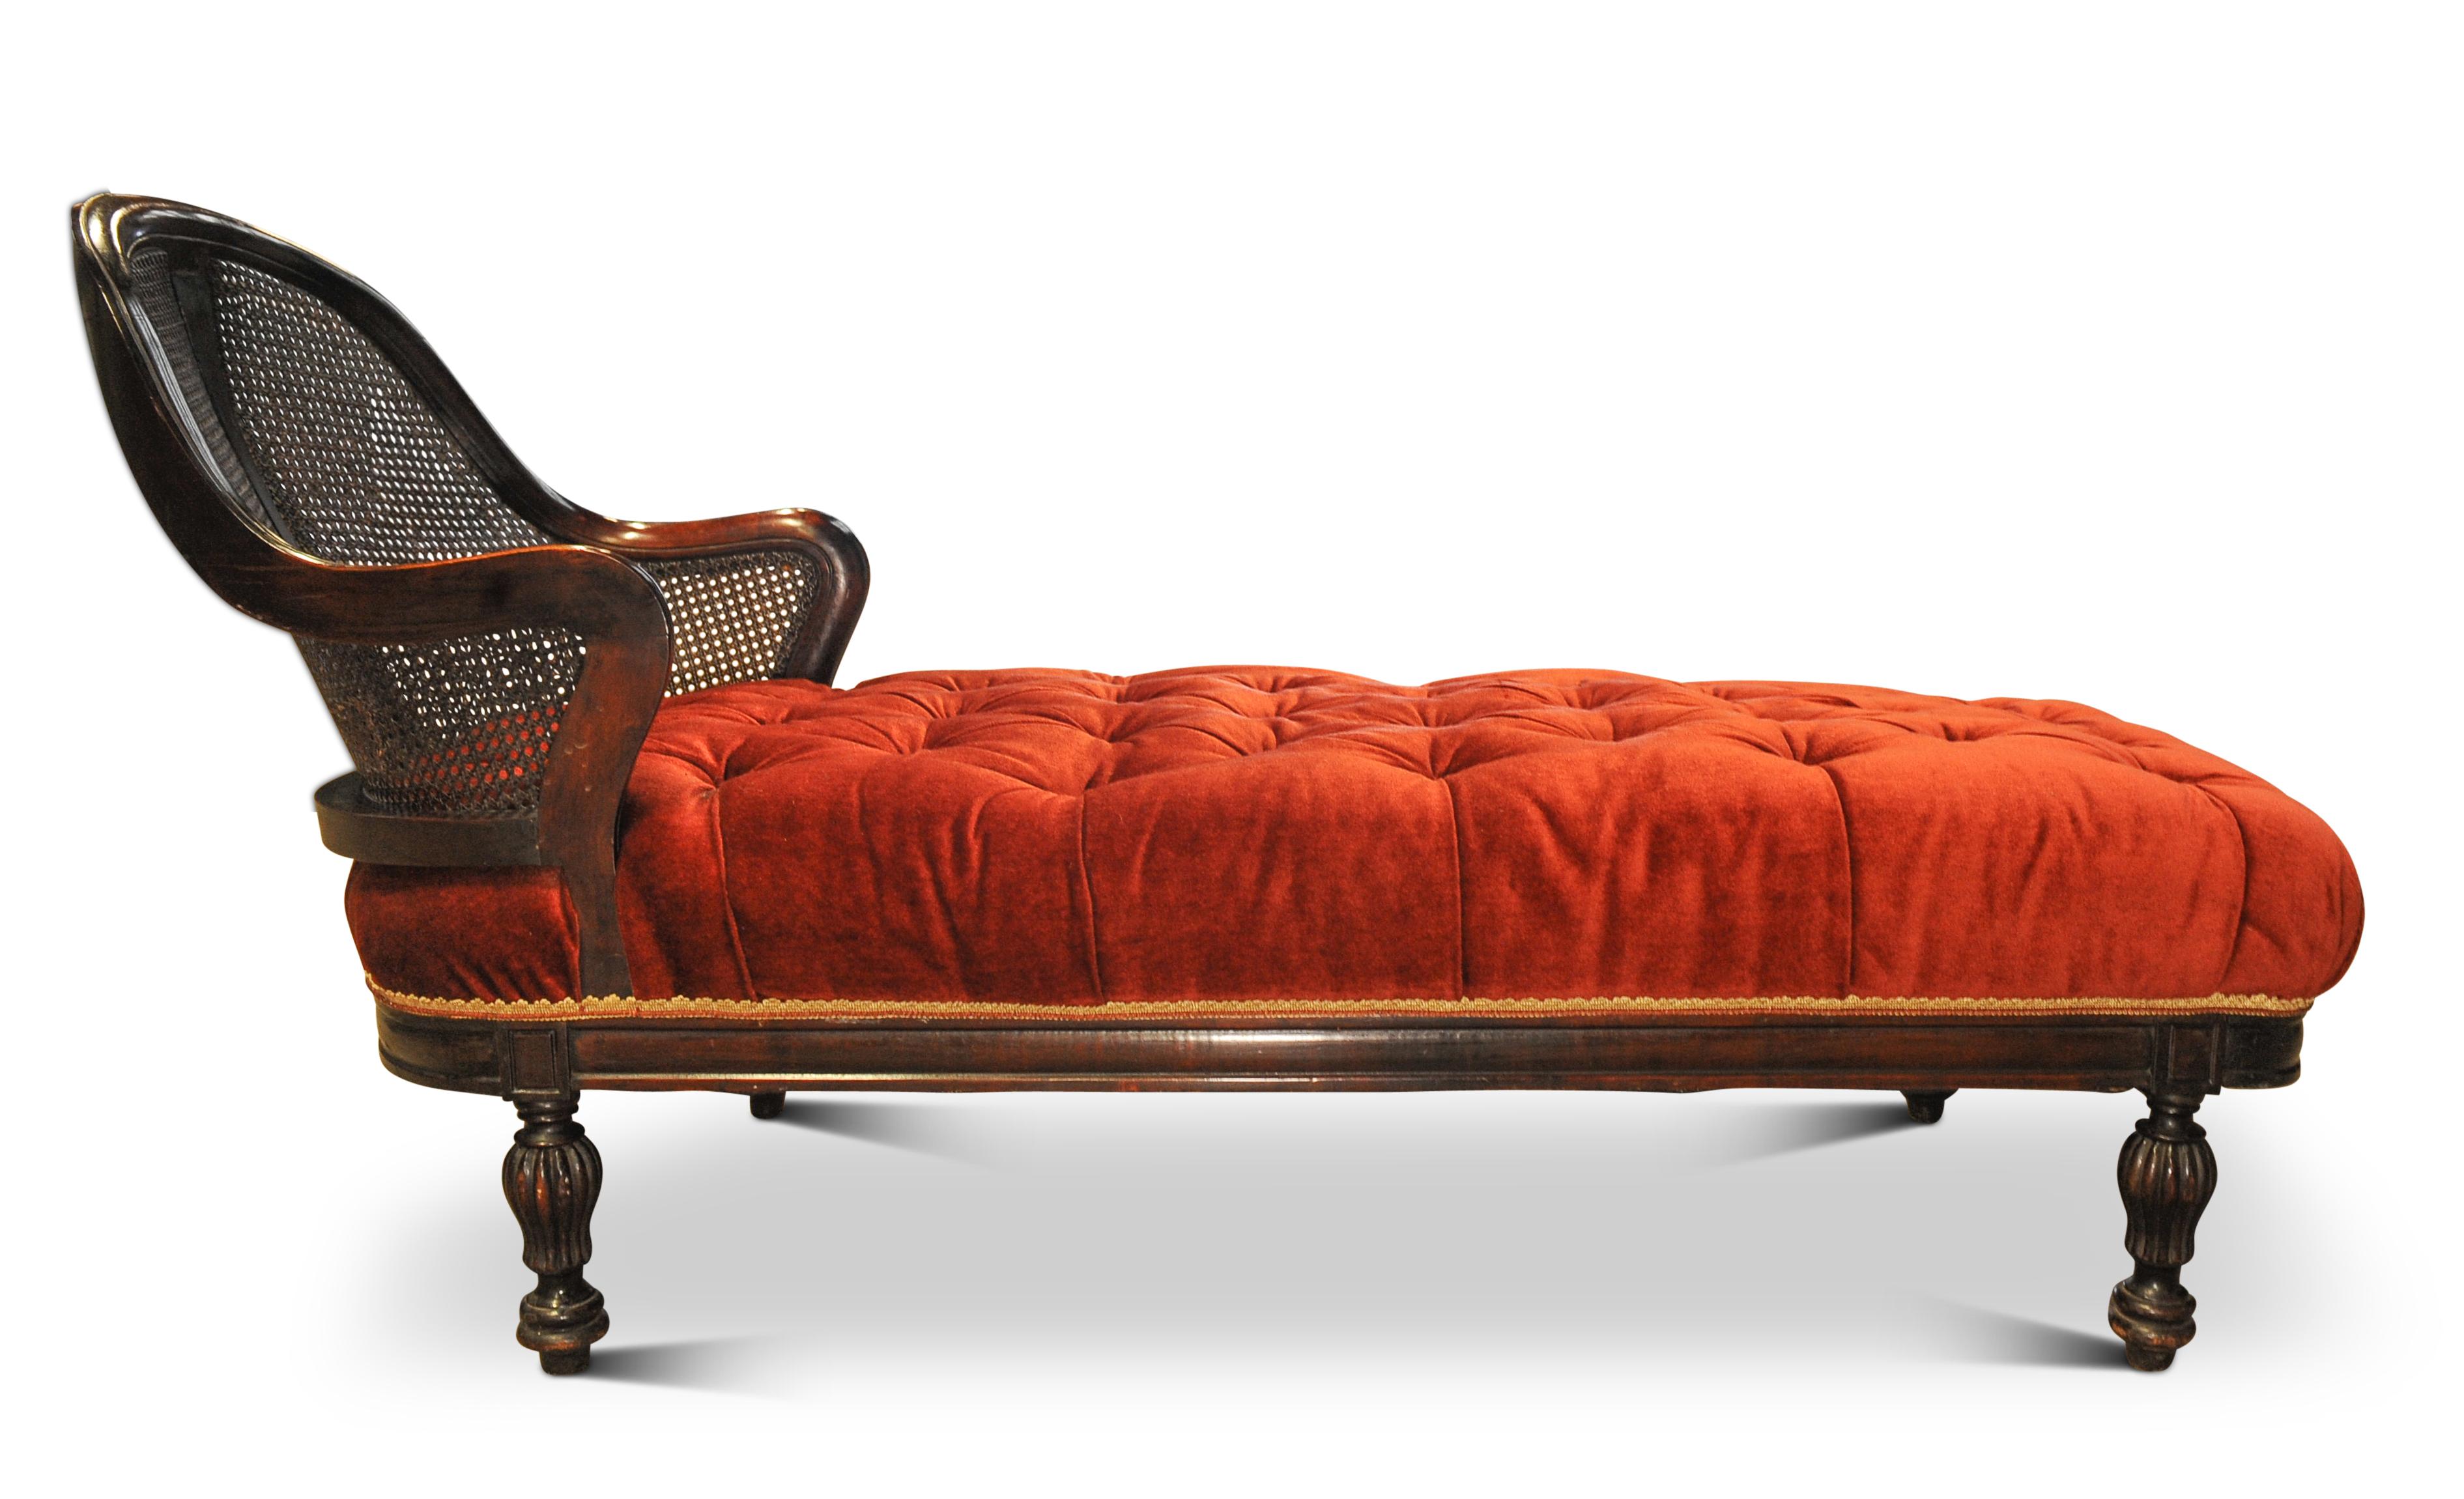 Rare and Unusual 19th Century Red Deep Button Velvet Bergere Chaise Longue / Day Bed With Cane Headrest Circa 1860 

Ideal for a living space or luxurious Boudoir. 

Really comfortable chaise with a really bright vibrant read velvet button-back 